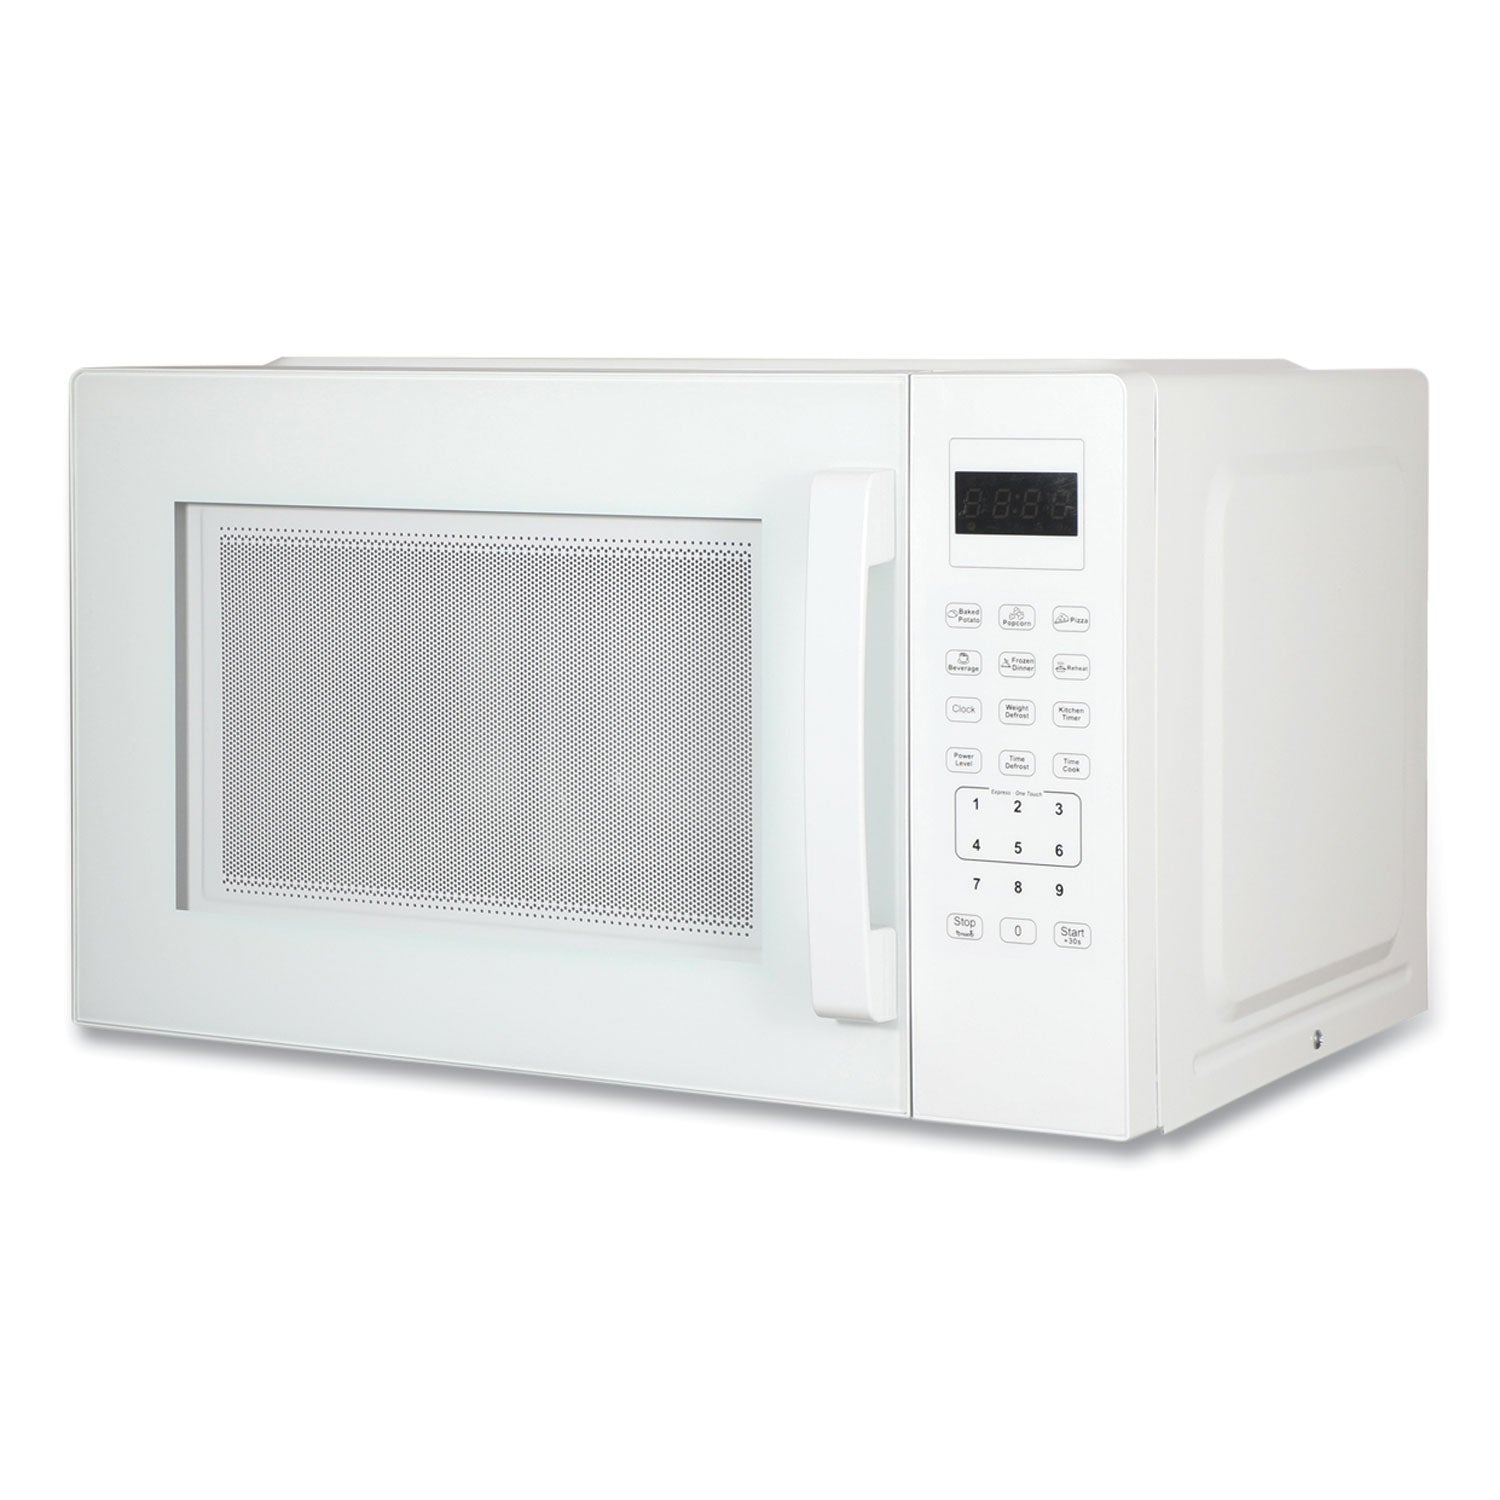 15-cu-ft-microwave-oven-1000-w-white_avamt150v0w - 3